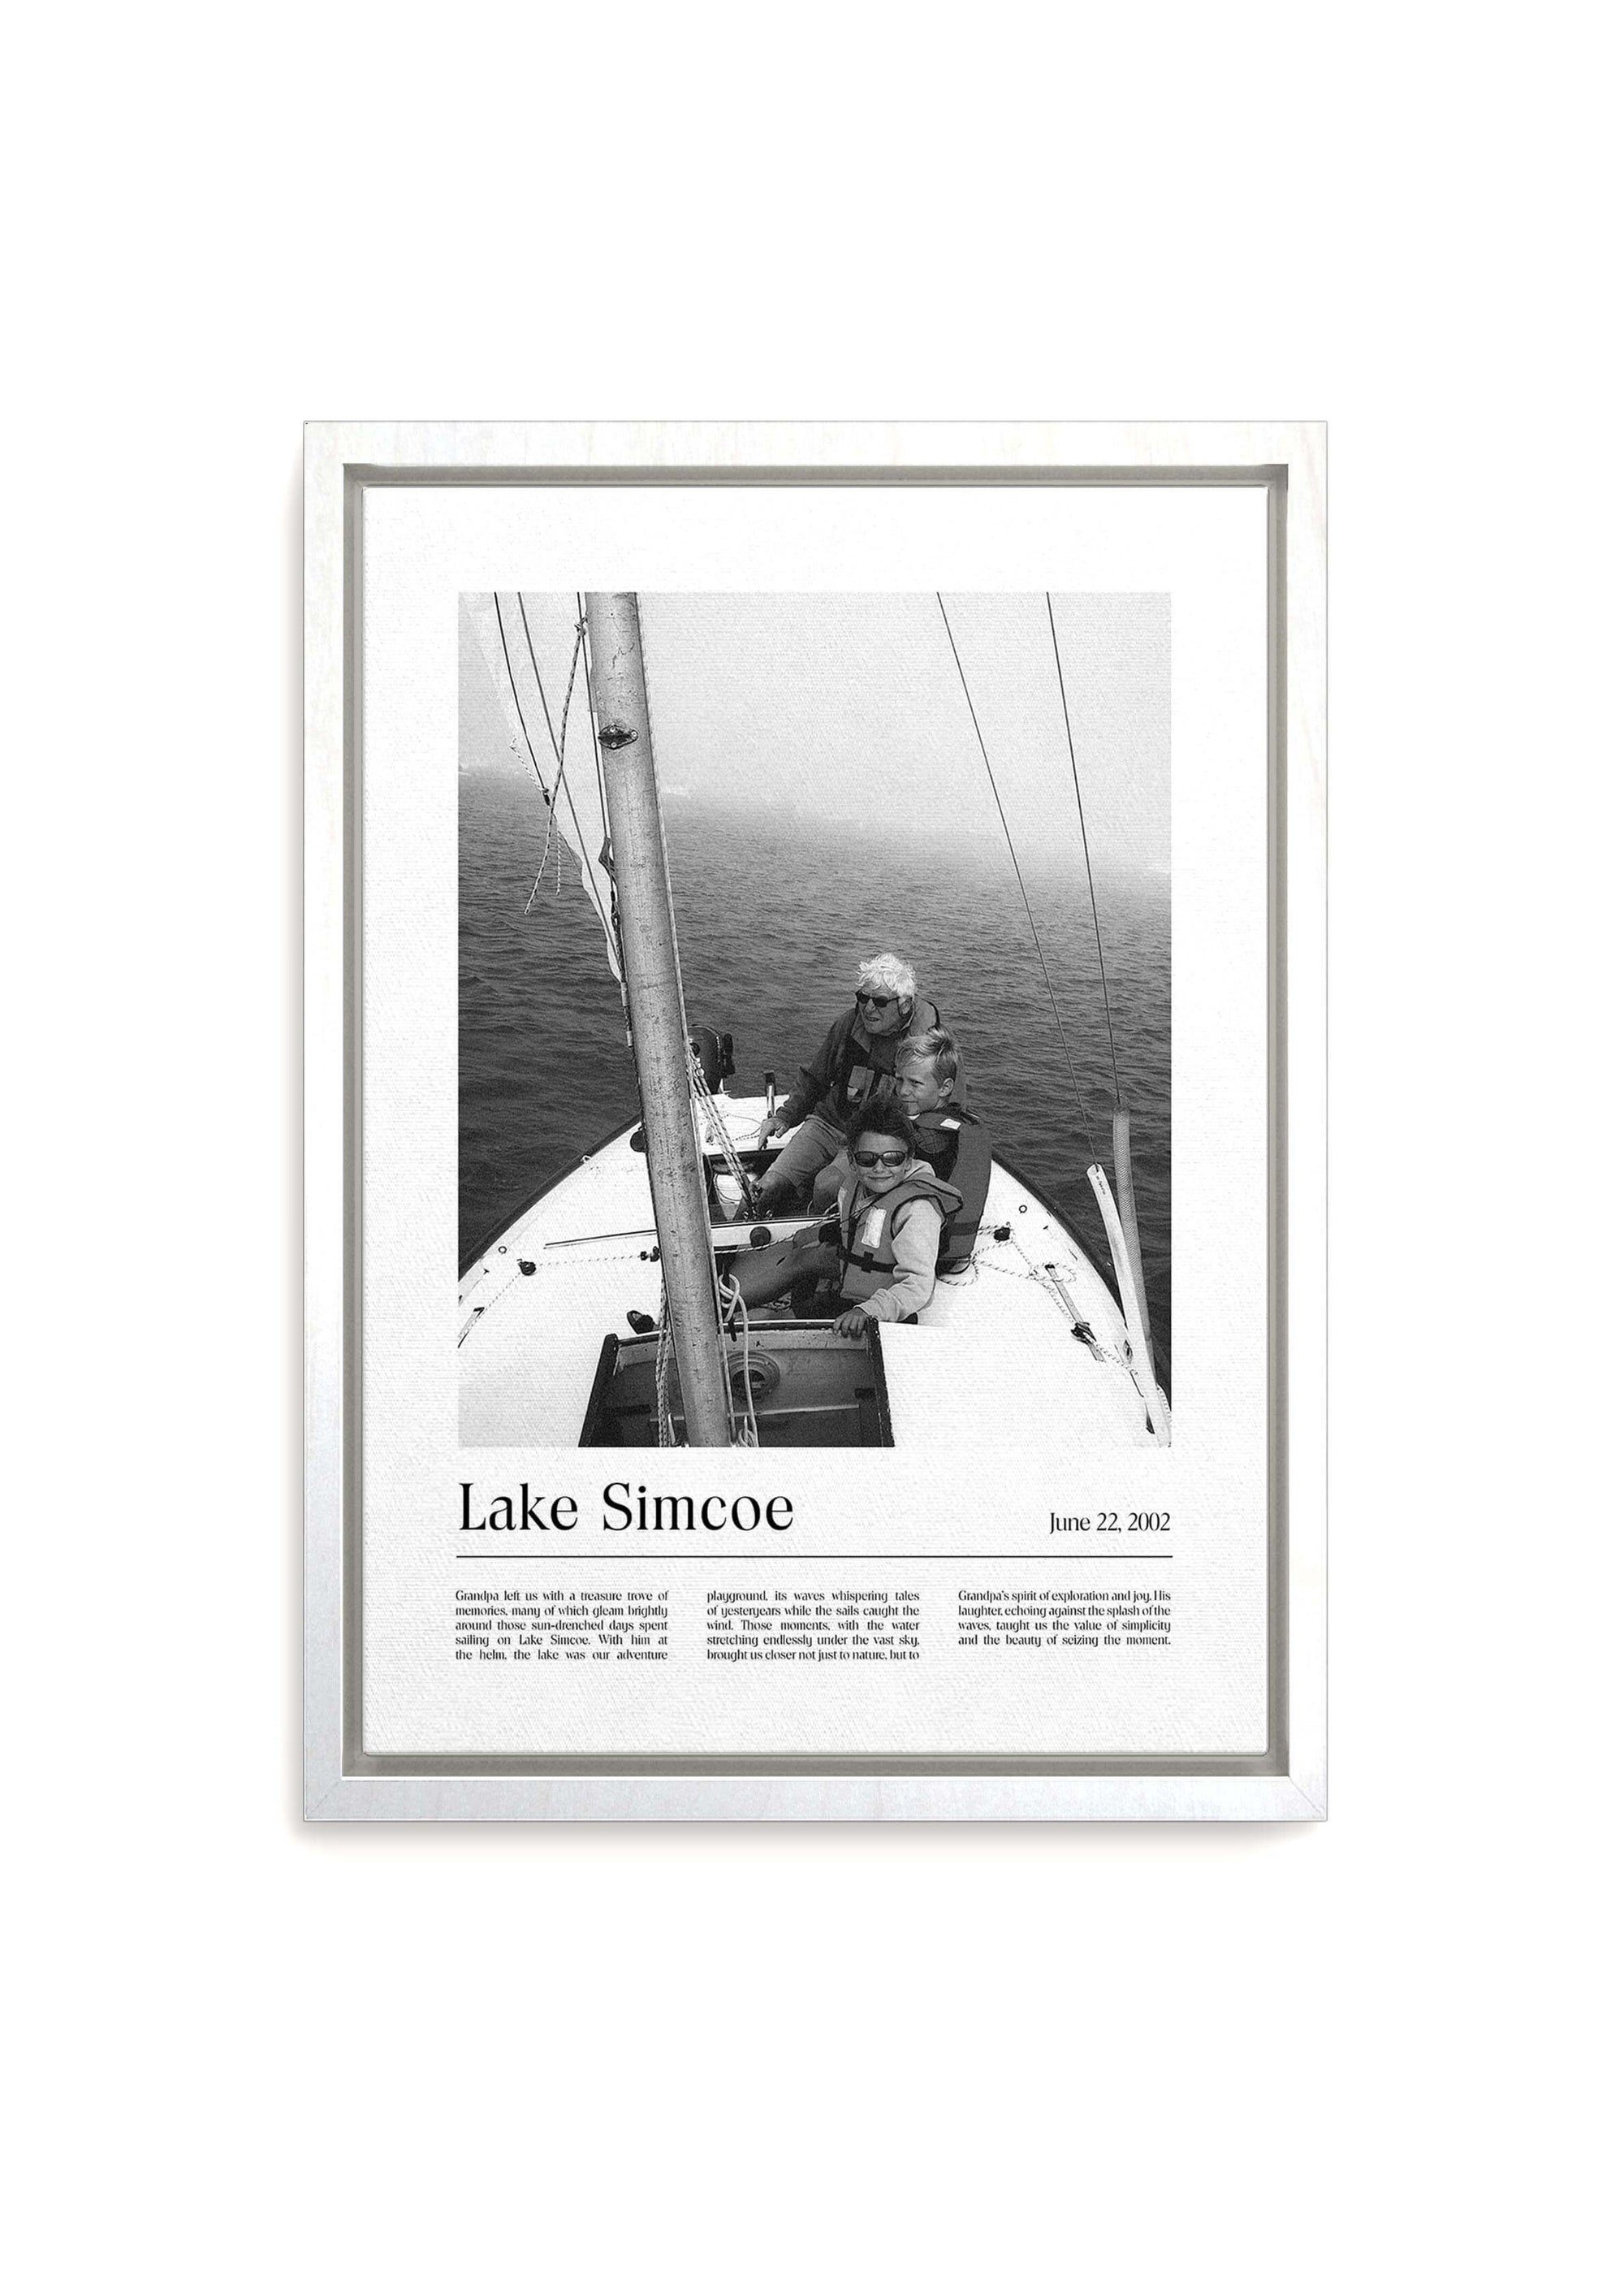 Personalized black and white photo gift on white framed canvas of children with grandpa sailing. The canvas is on a white background and has a custom message inscribed on it.